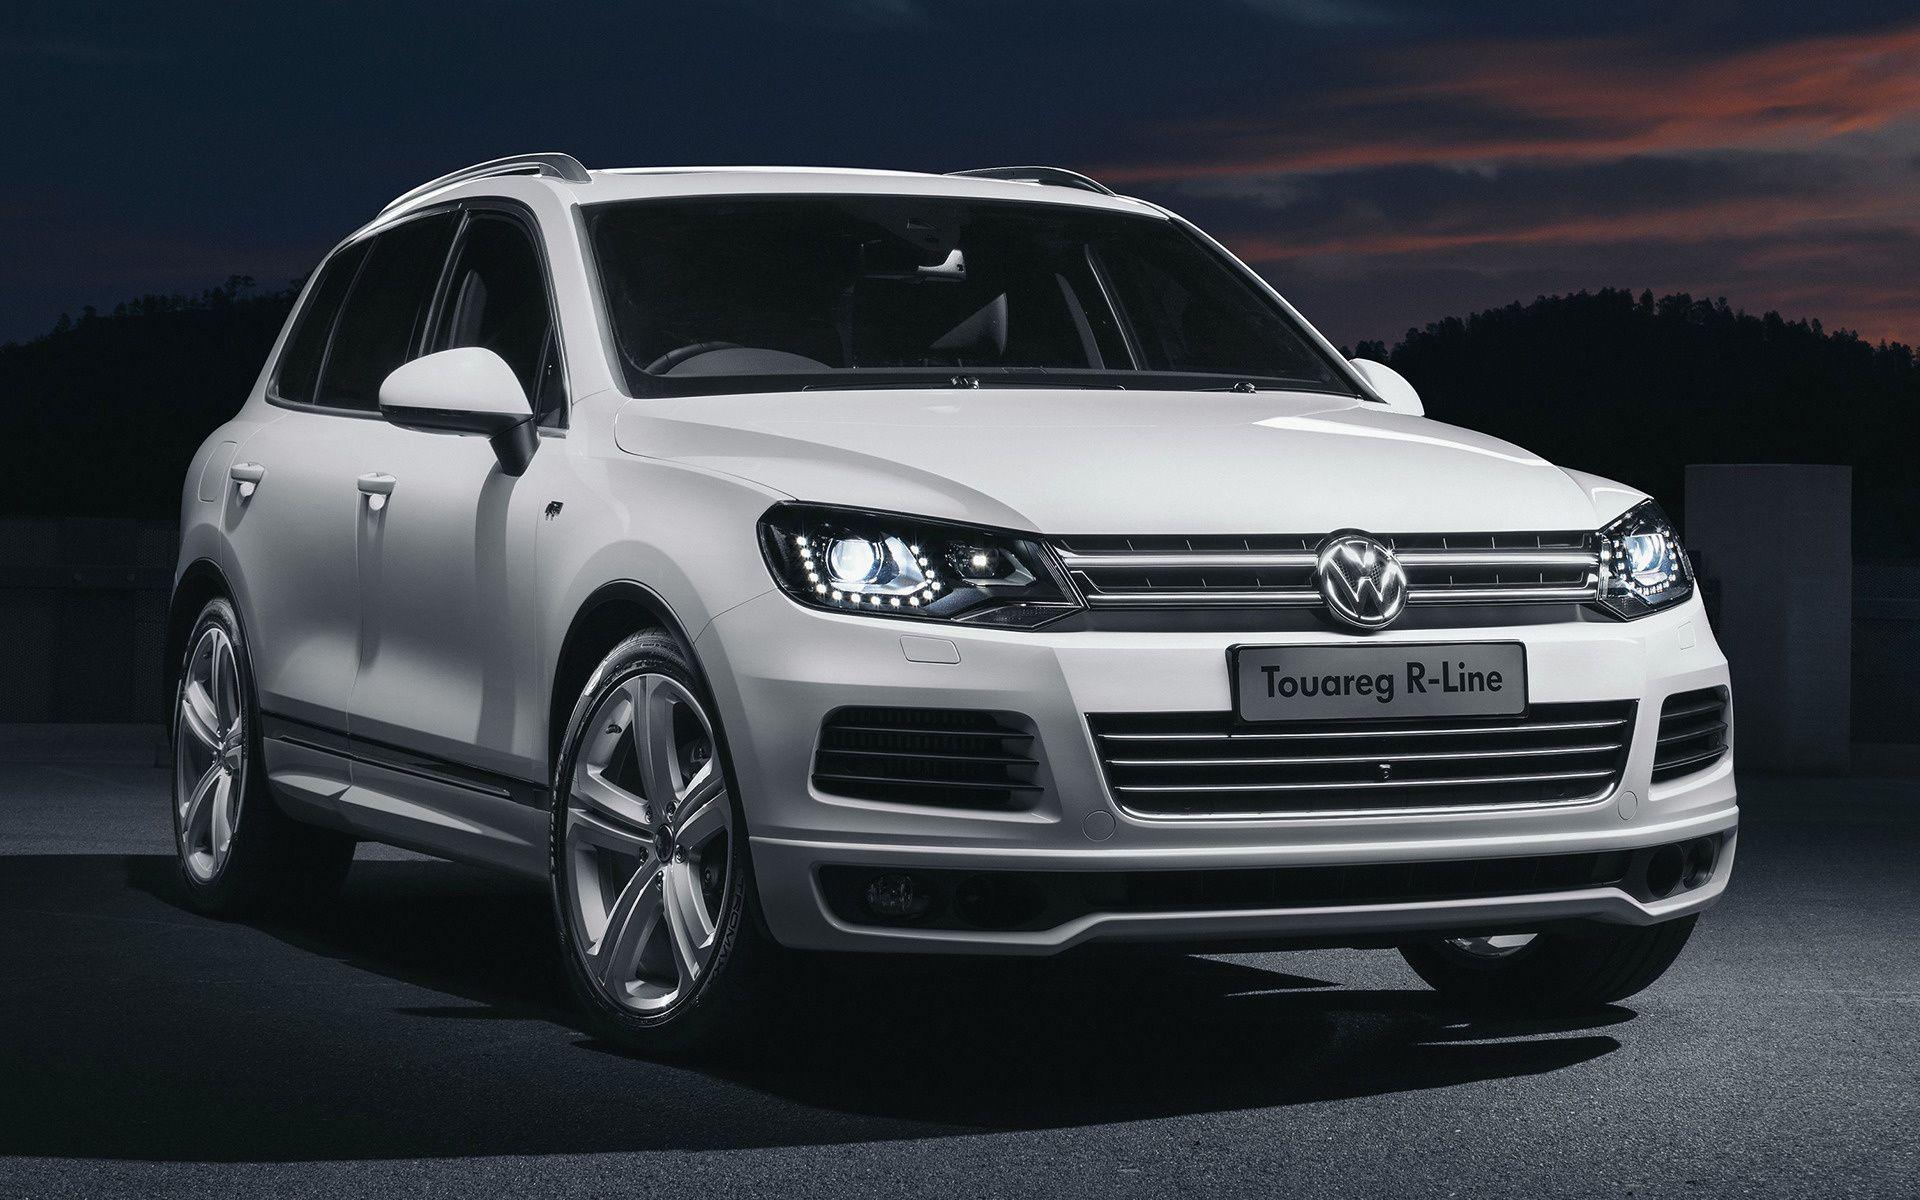 Volkswagen Touareg R Line (2011) AU Wallpaper And HD Image